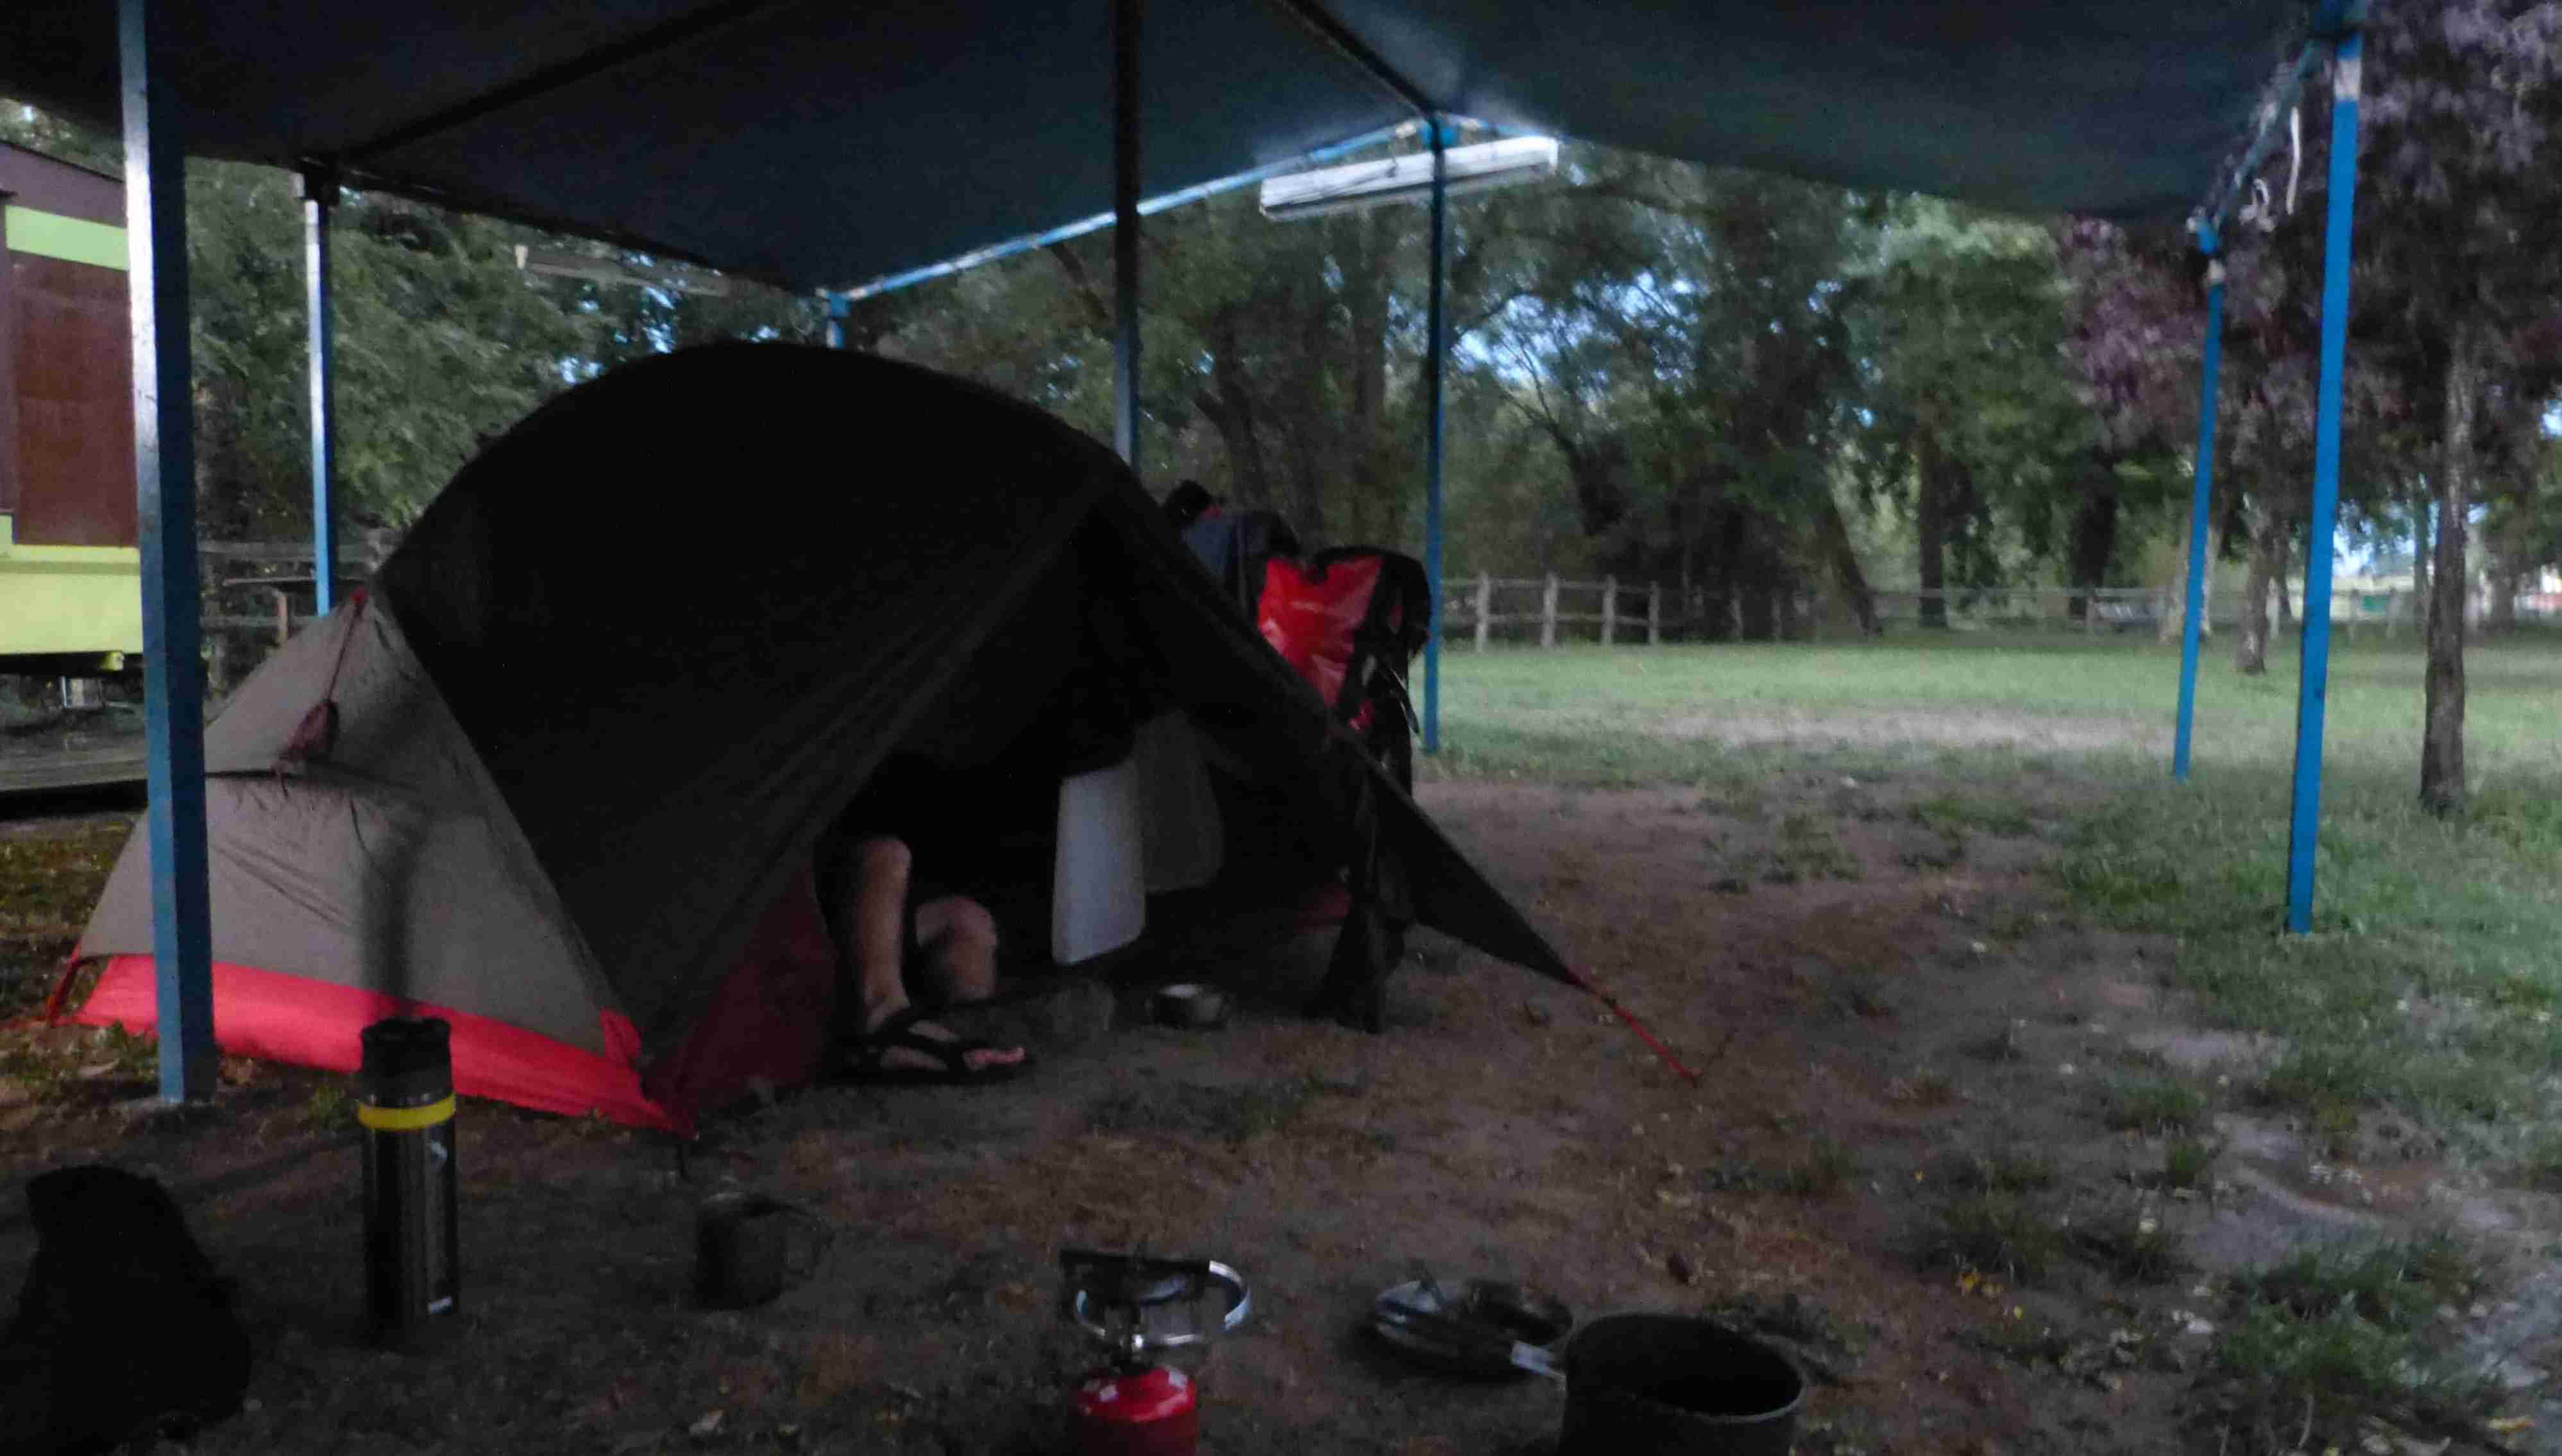 Saved by a kind campsite owner, during a miserable rainy evening